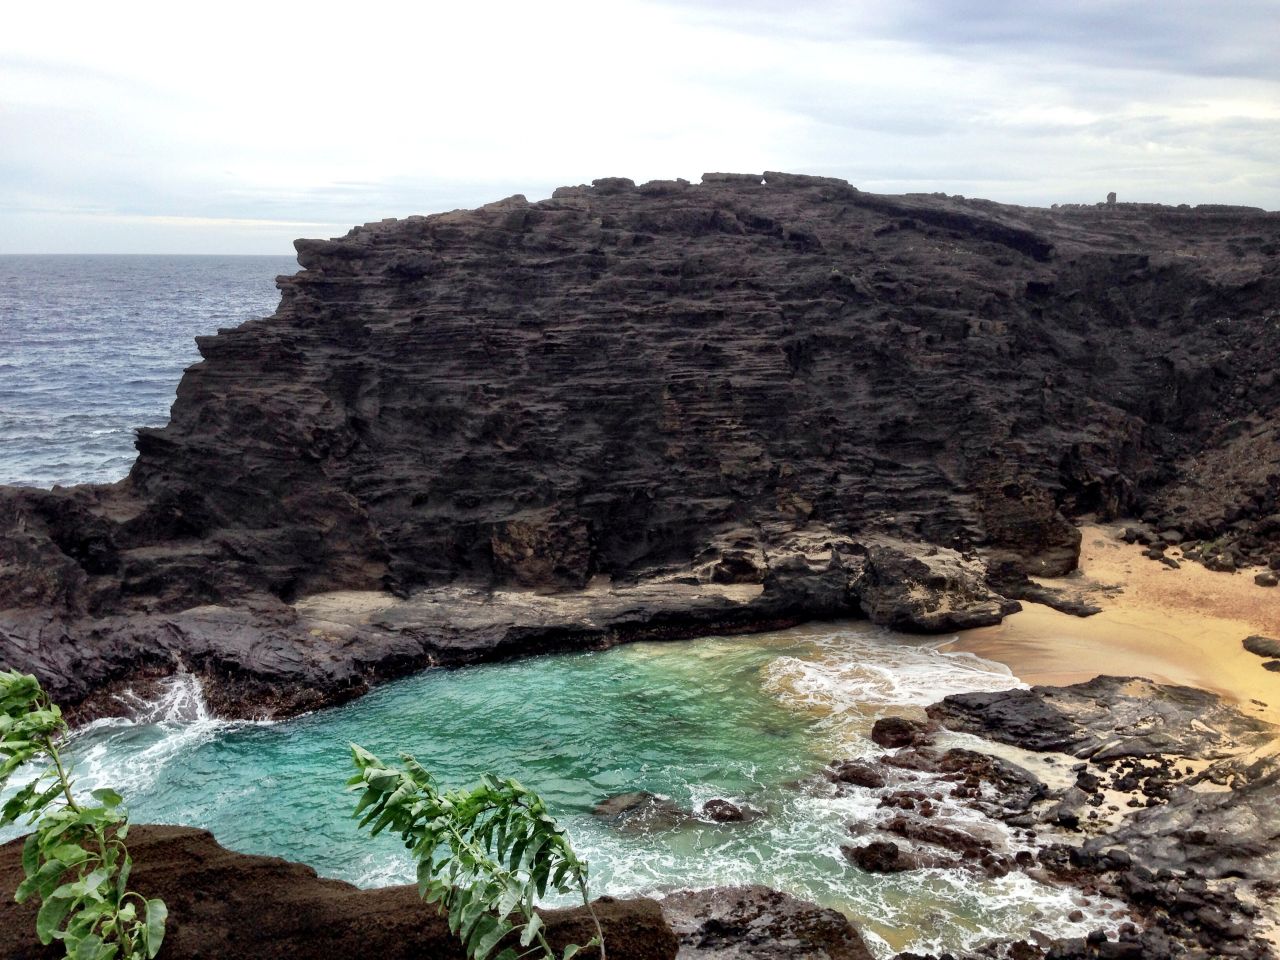 A short hike down an unpaved path leads to Halona Beach Cove. The beach on Oahu's southern shore had a role in the 1953 movie "From Here to Eternity."